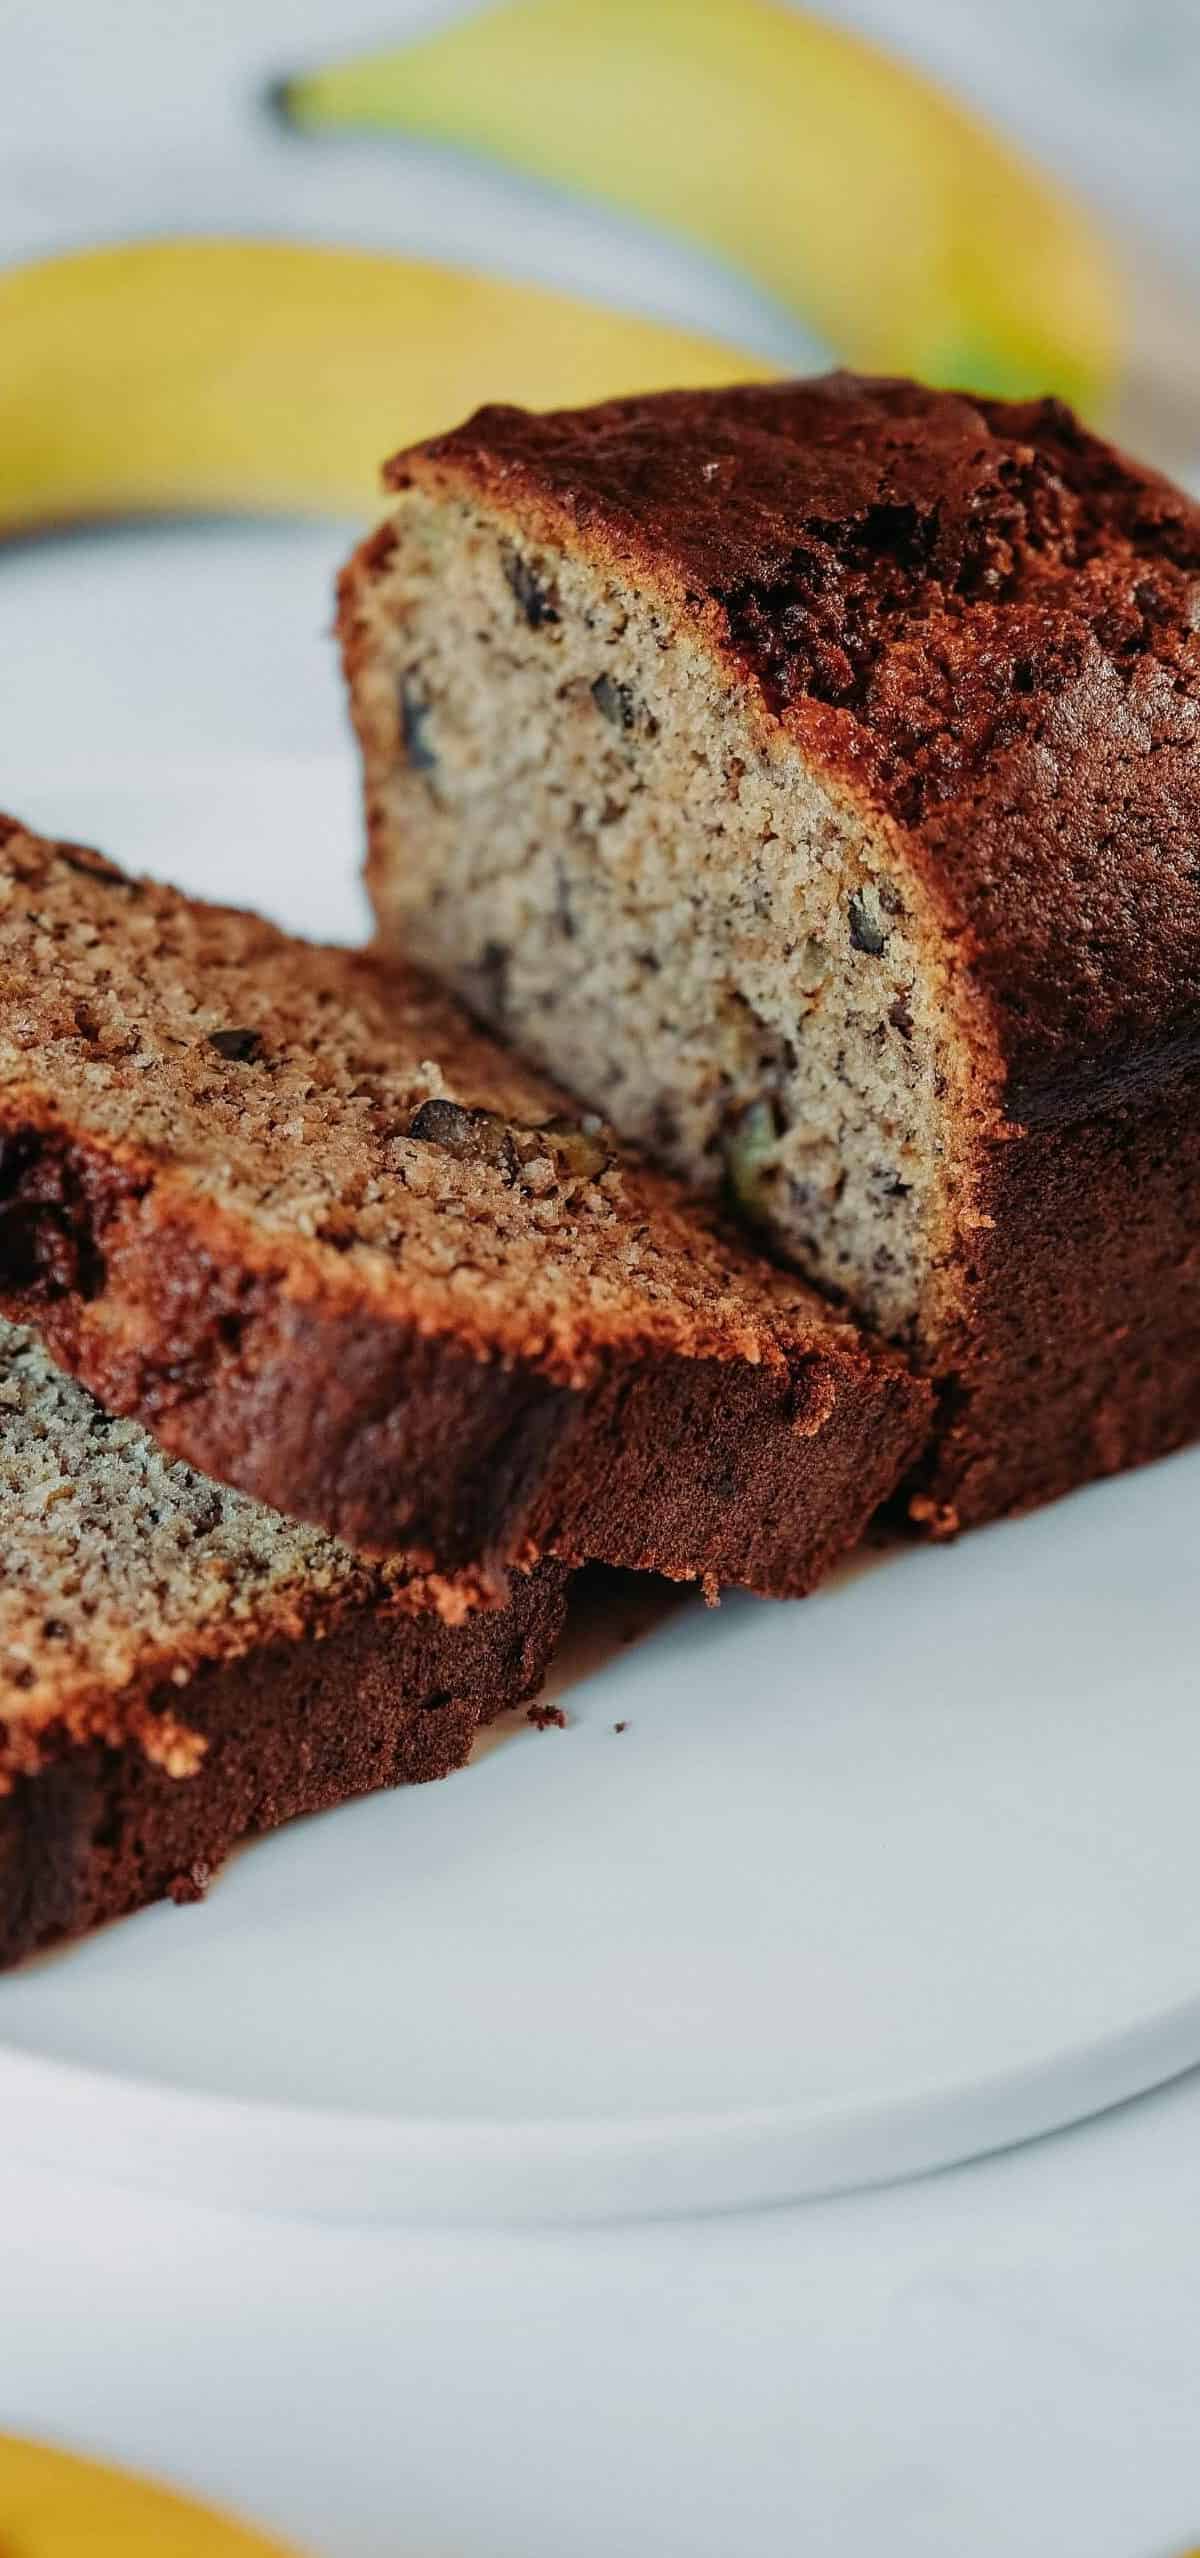  This bread is so moist and delicious, you'll want to have it for breakfast every day